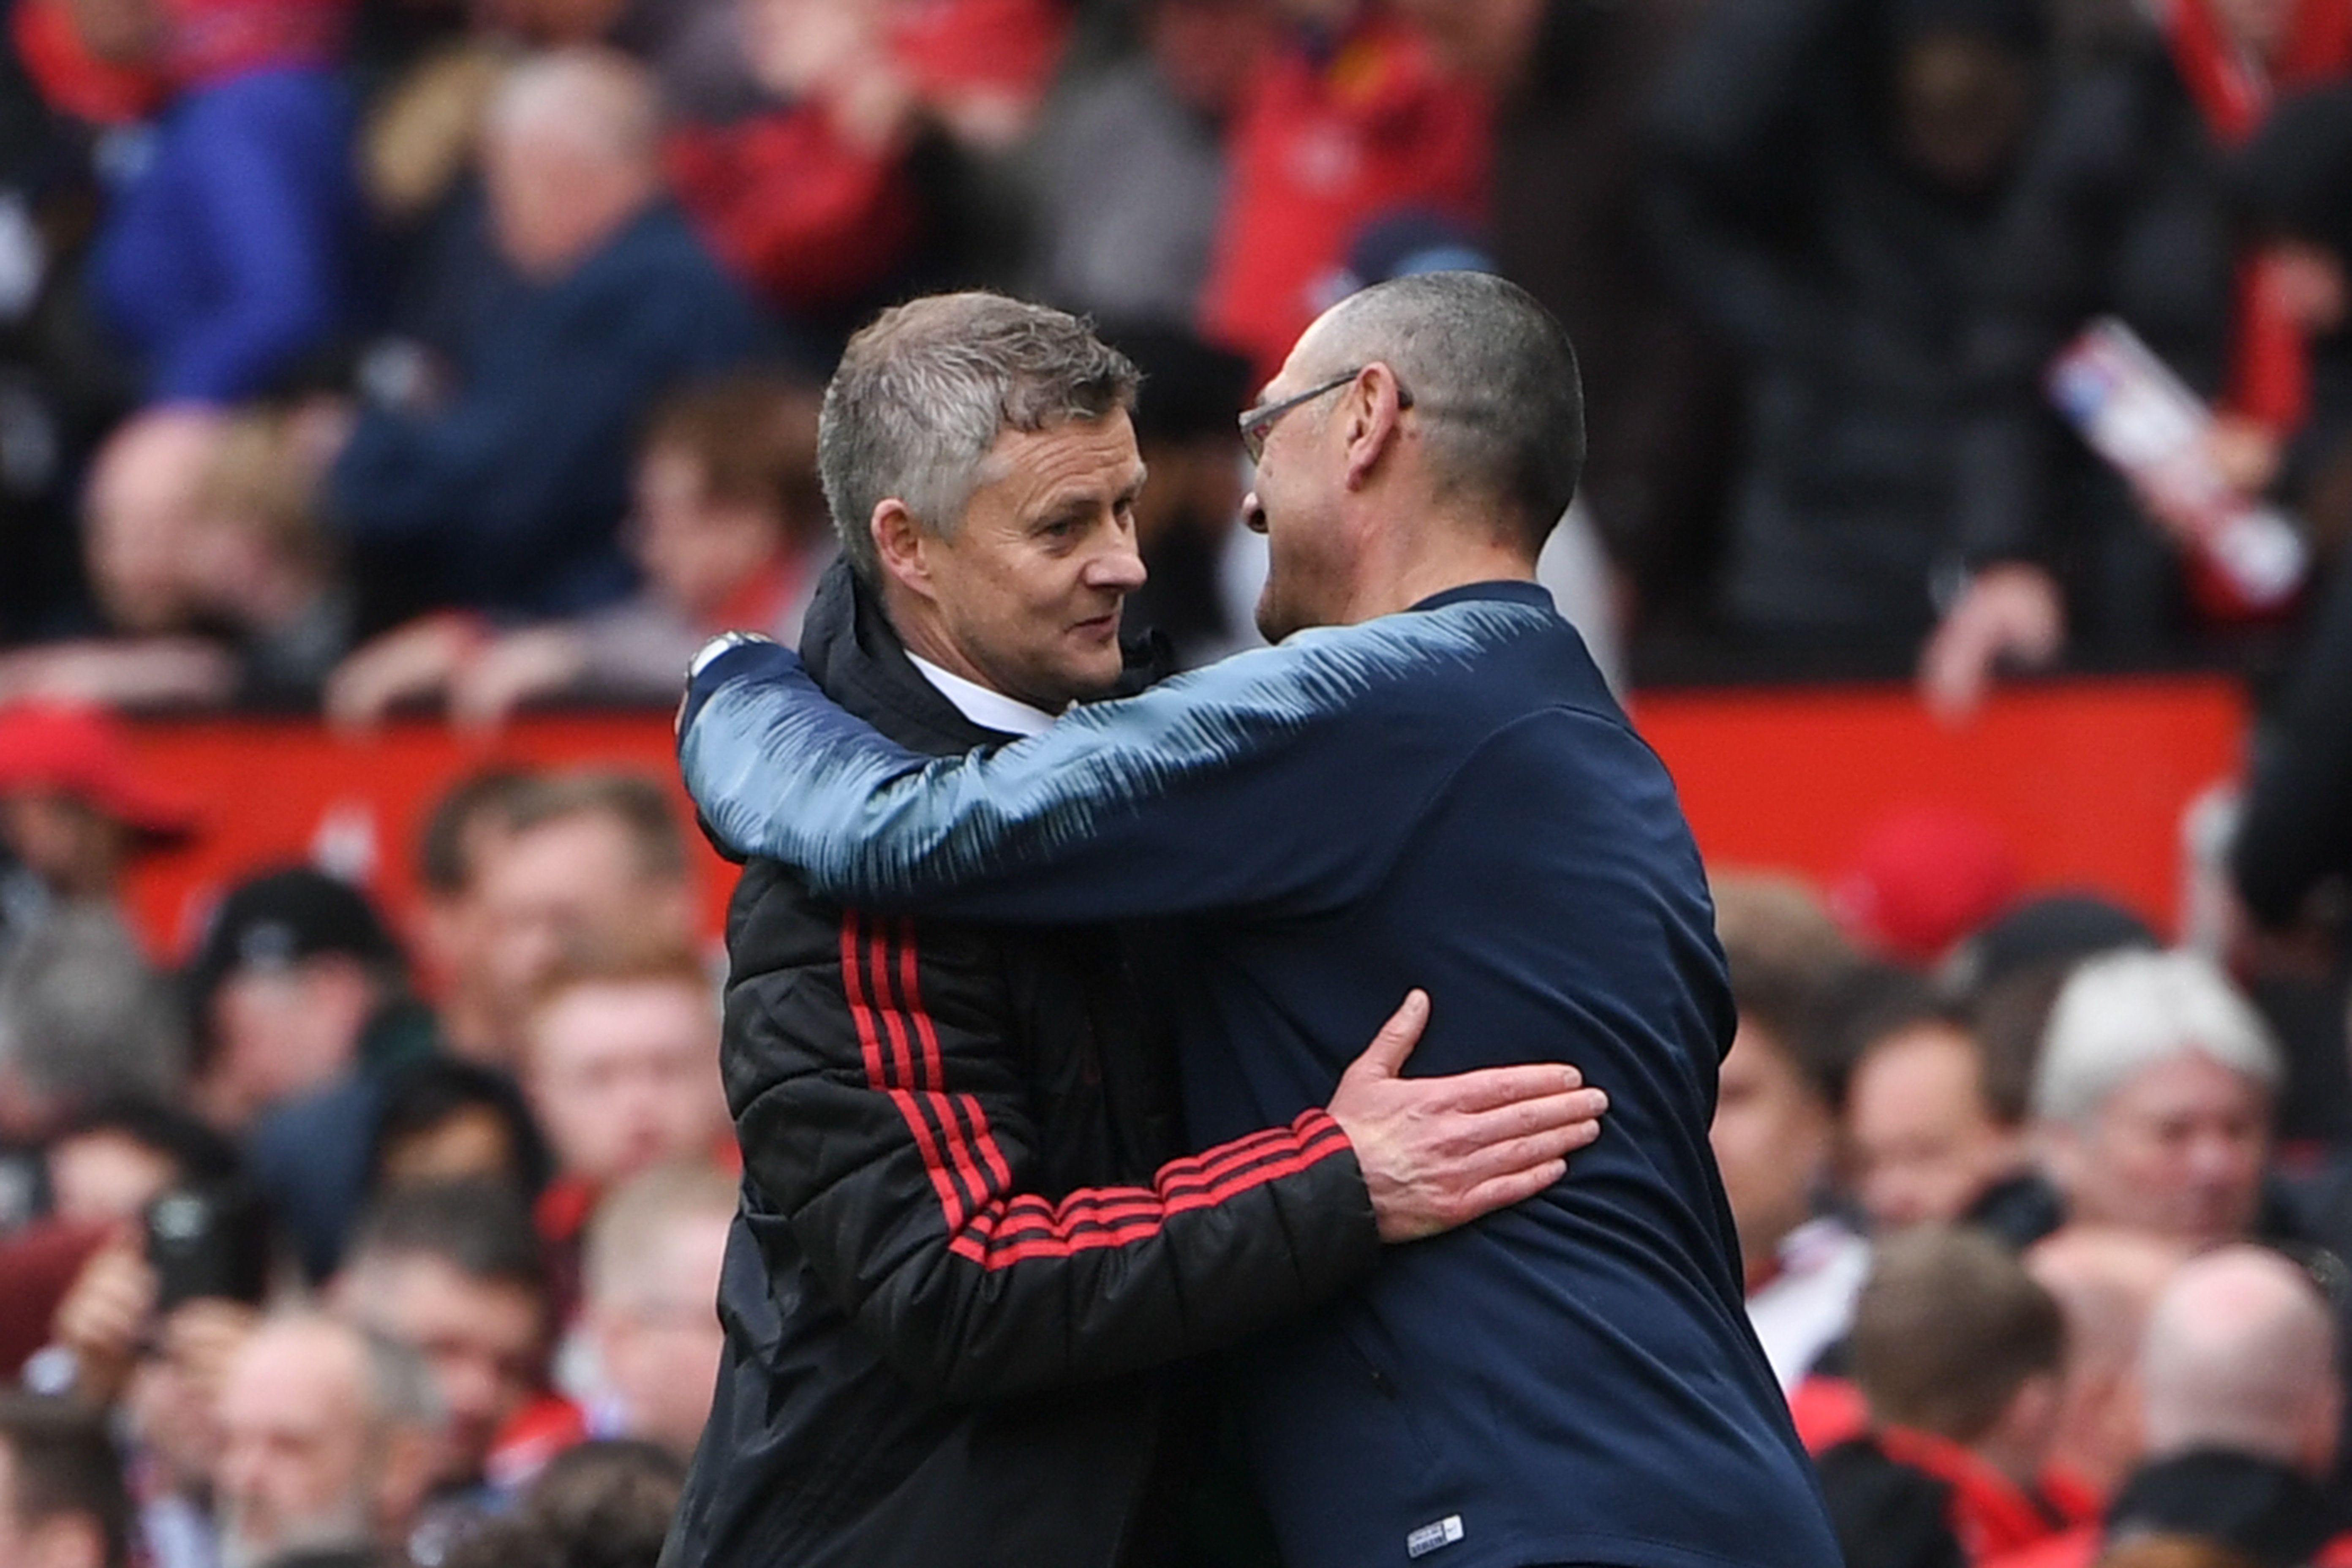 Manchester United's Norwegian manager Ole Gunnar Solskjaer (L) embraces Chelsea's Italian head coach Maurizio Sarri (R) at the end of the English Premier League football match between Manchester United and Chelsea at Old Trafford in Manchester, north west England, on April 28, 2019. (Photo by Paul ELLIS / AFP) / RESTRICTED TO EDITORIAL USE. No use with unauthorized audio, video, data, fixture lists, club/league logos or 'live' services. Online in-match use limited to 120 images. An additional 40 images may be used in extra time. No video emulation. Social media in-match use limited to 120 images. An additional 40 images may be used in extra time. No use in betting publications, games or single club/league/player publications. /         (Photo credit should read PAUL ELLIS/AFP/Getty Images)